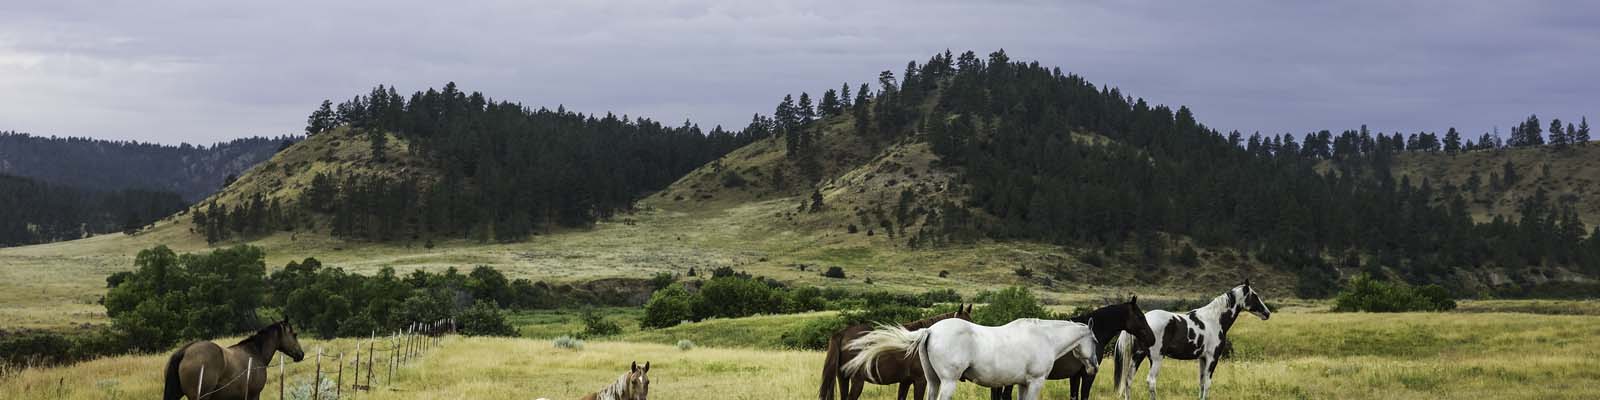 This is an image of a horse farm in Billings Montana. ASTA-USA provides professional translation services in this city.